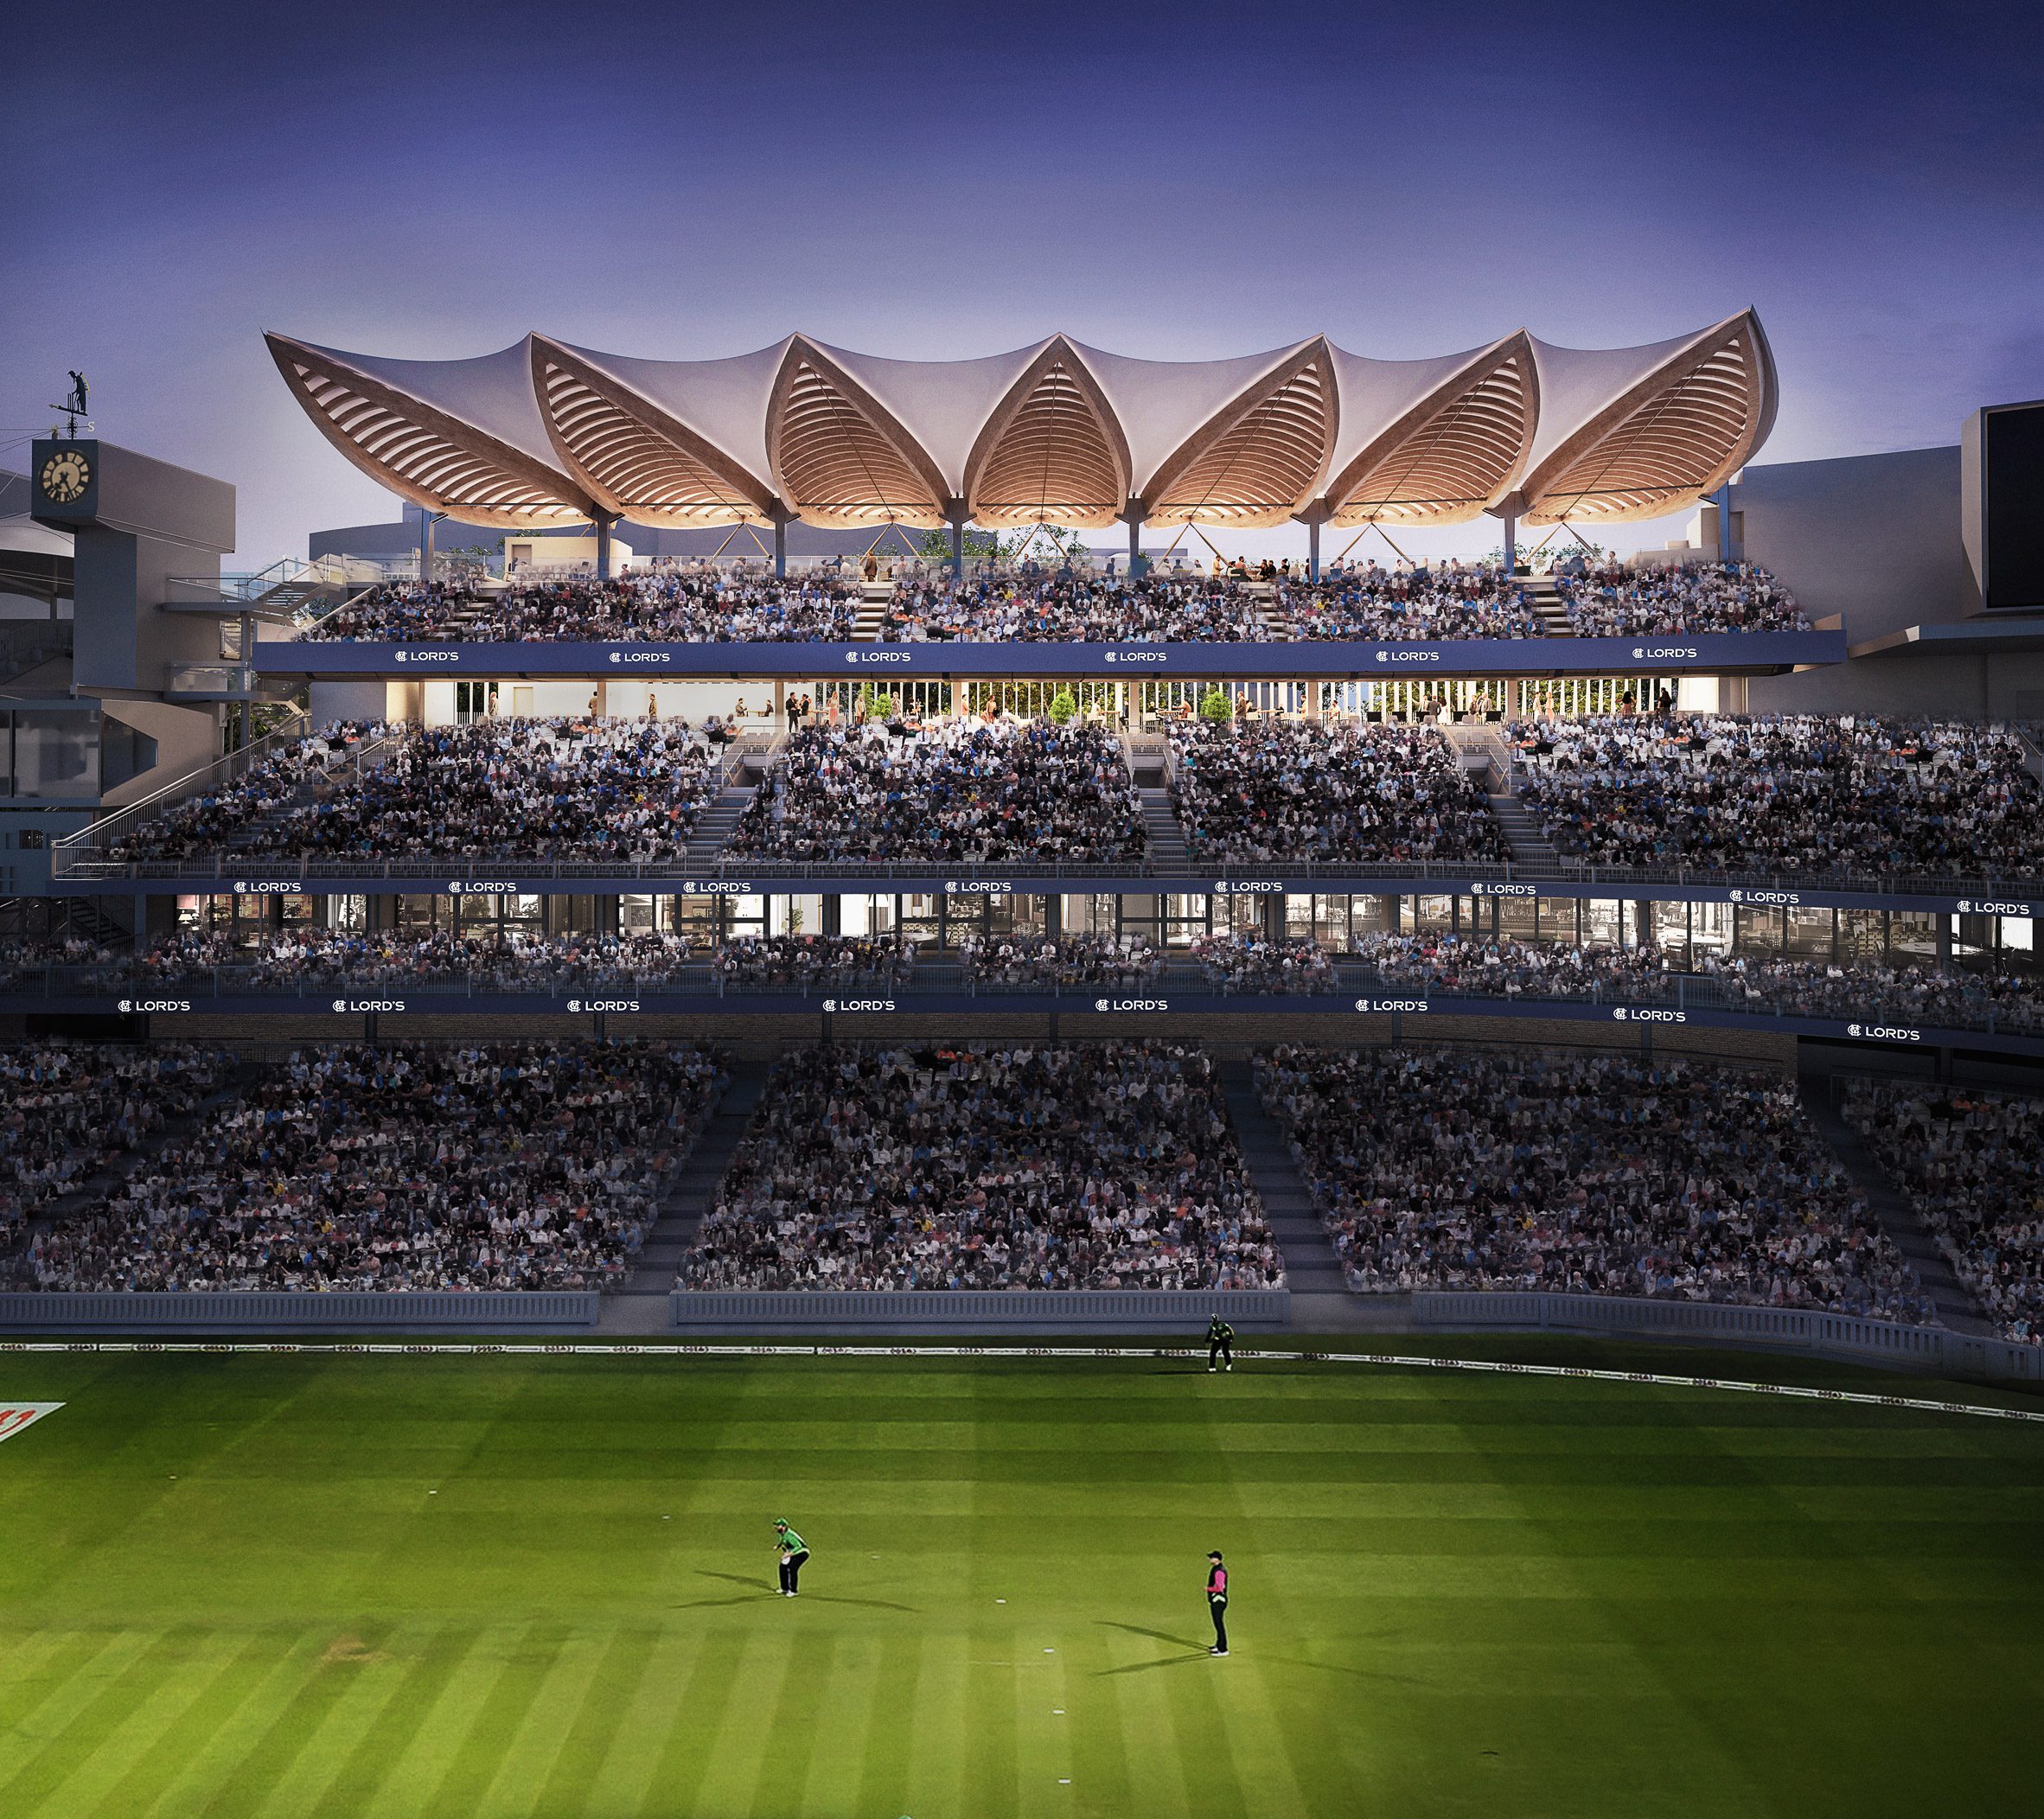 Render of Tavern stand at Lord's Cricket Ground